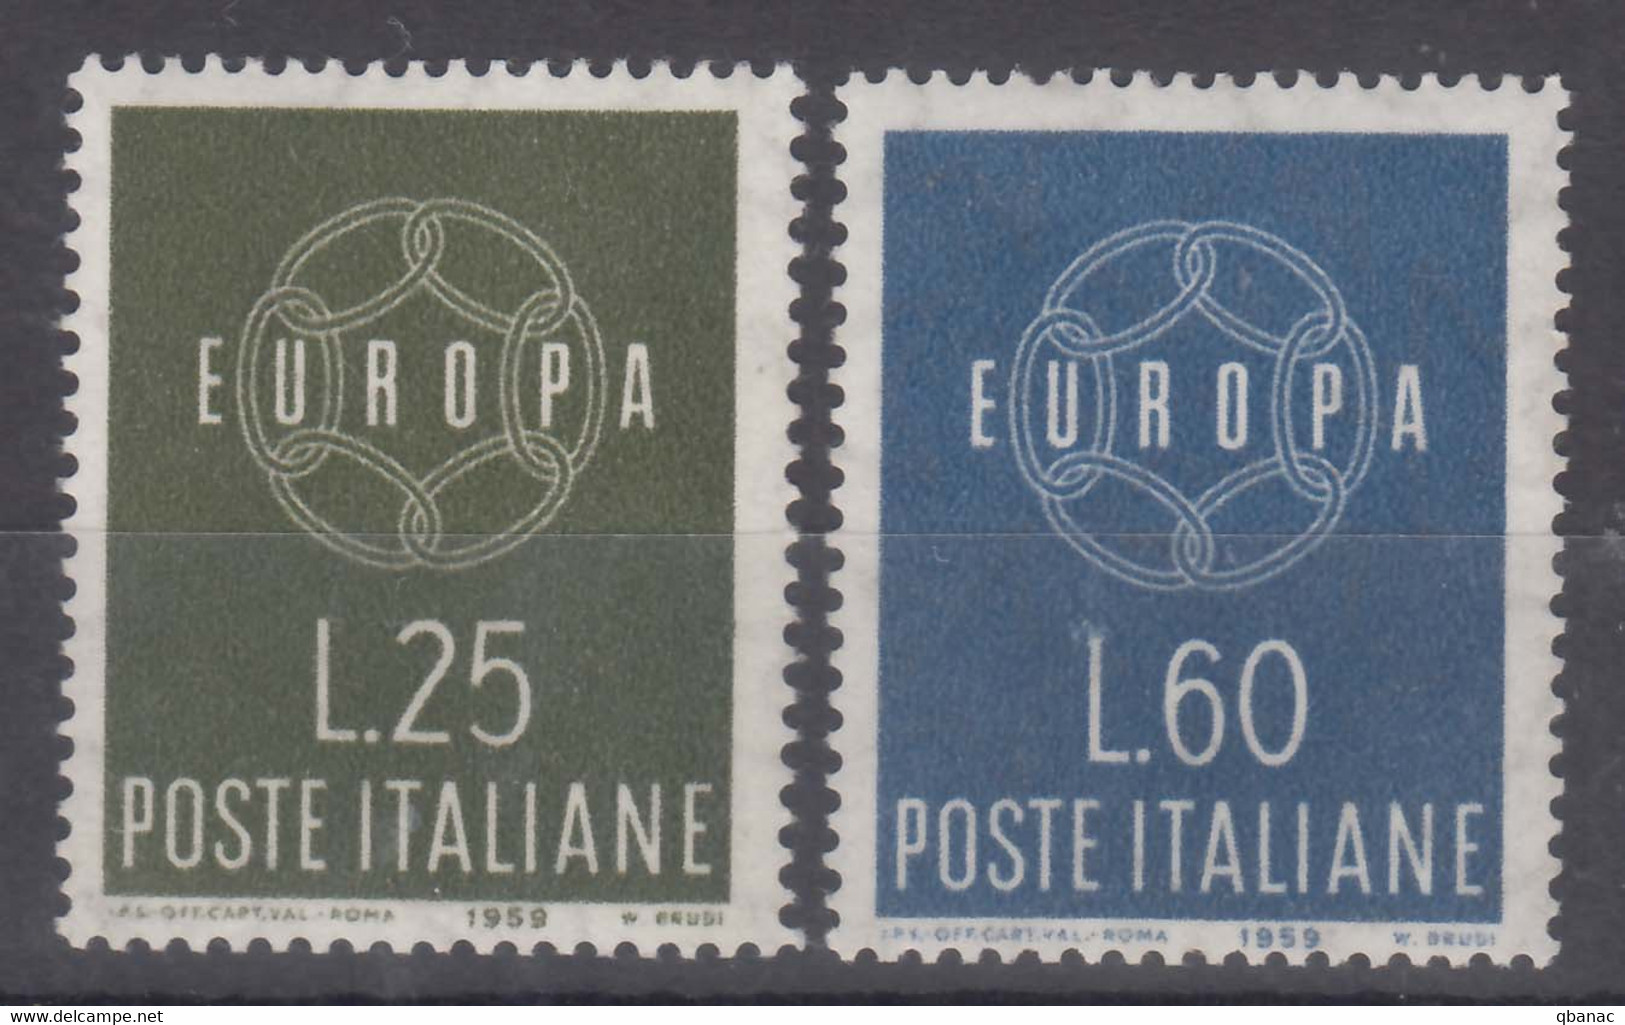 Italy 1959 Europa Mint Never Hinged - 1959